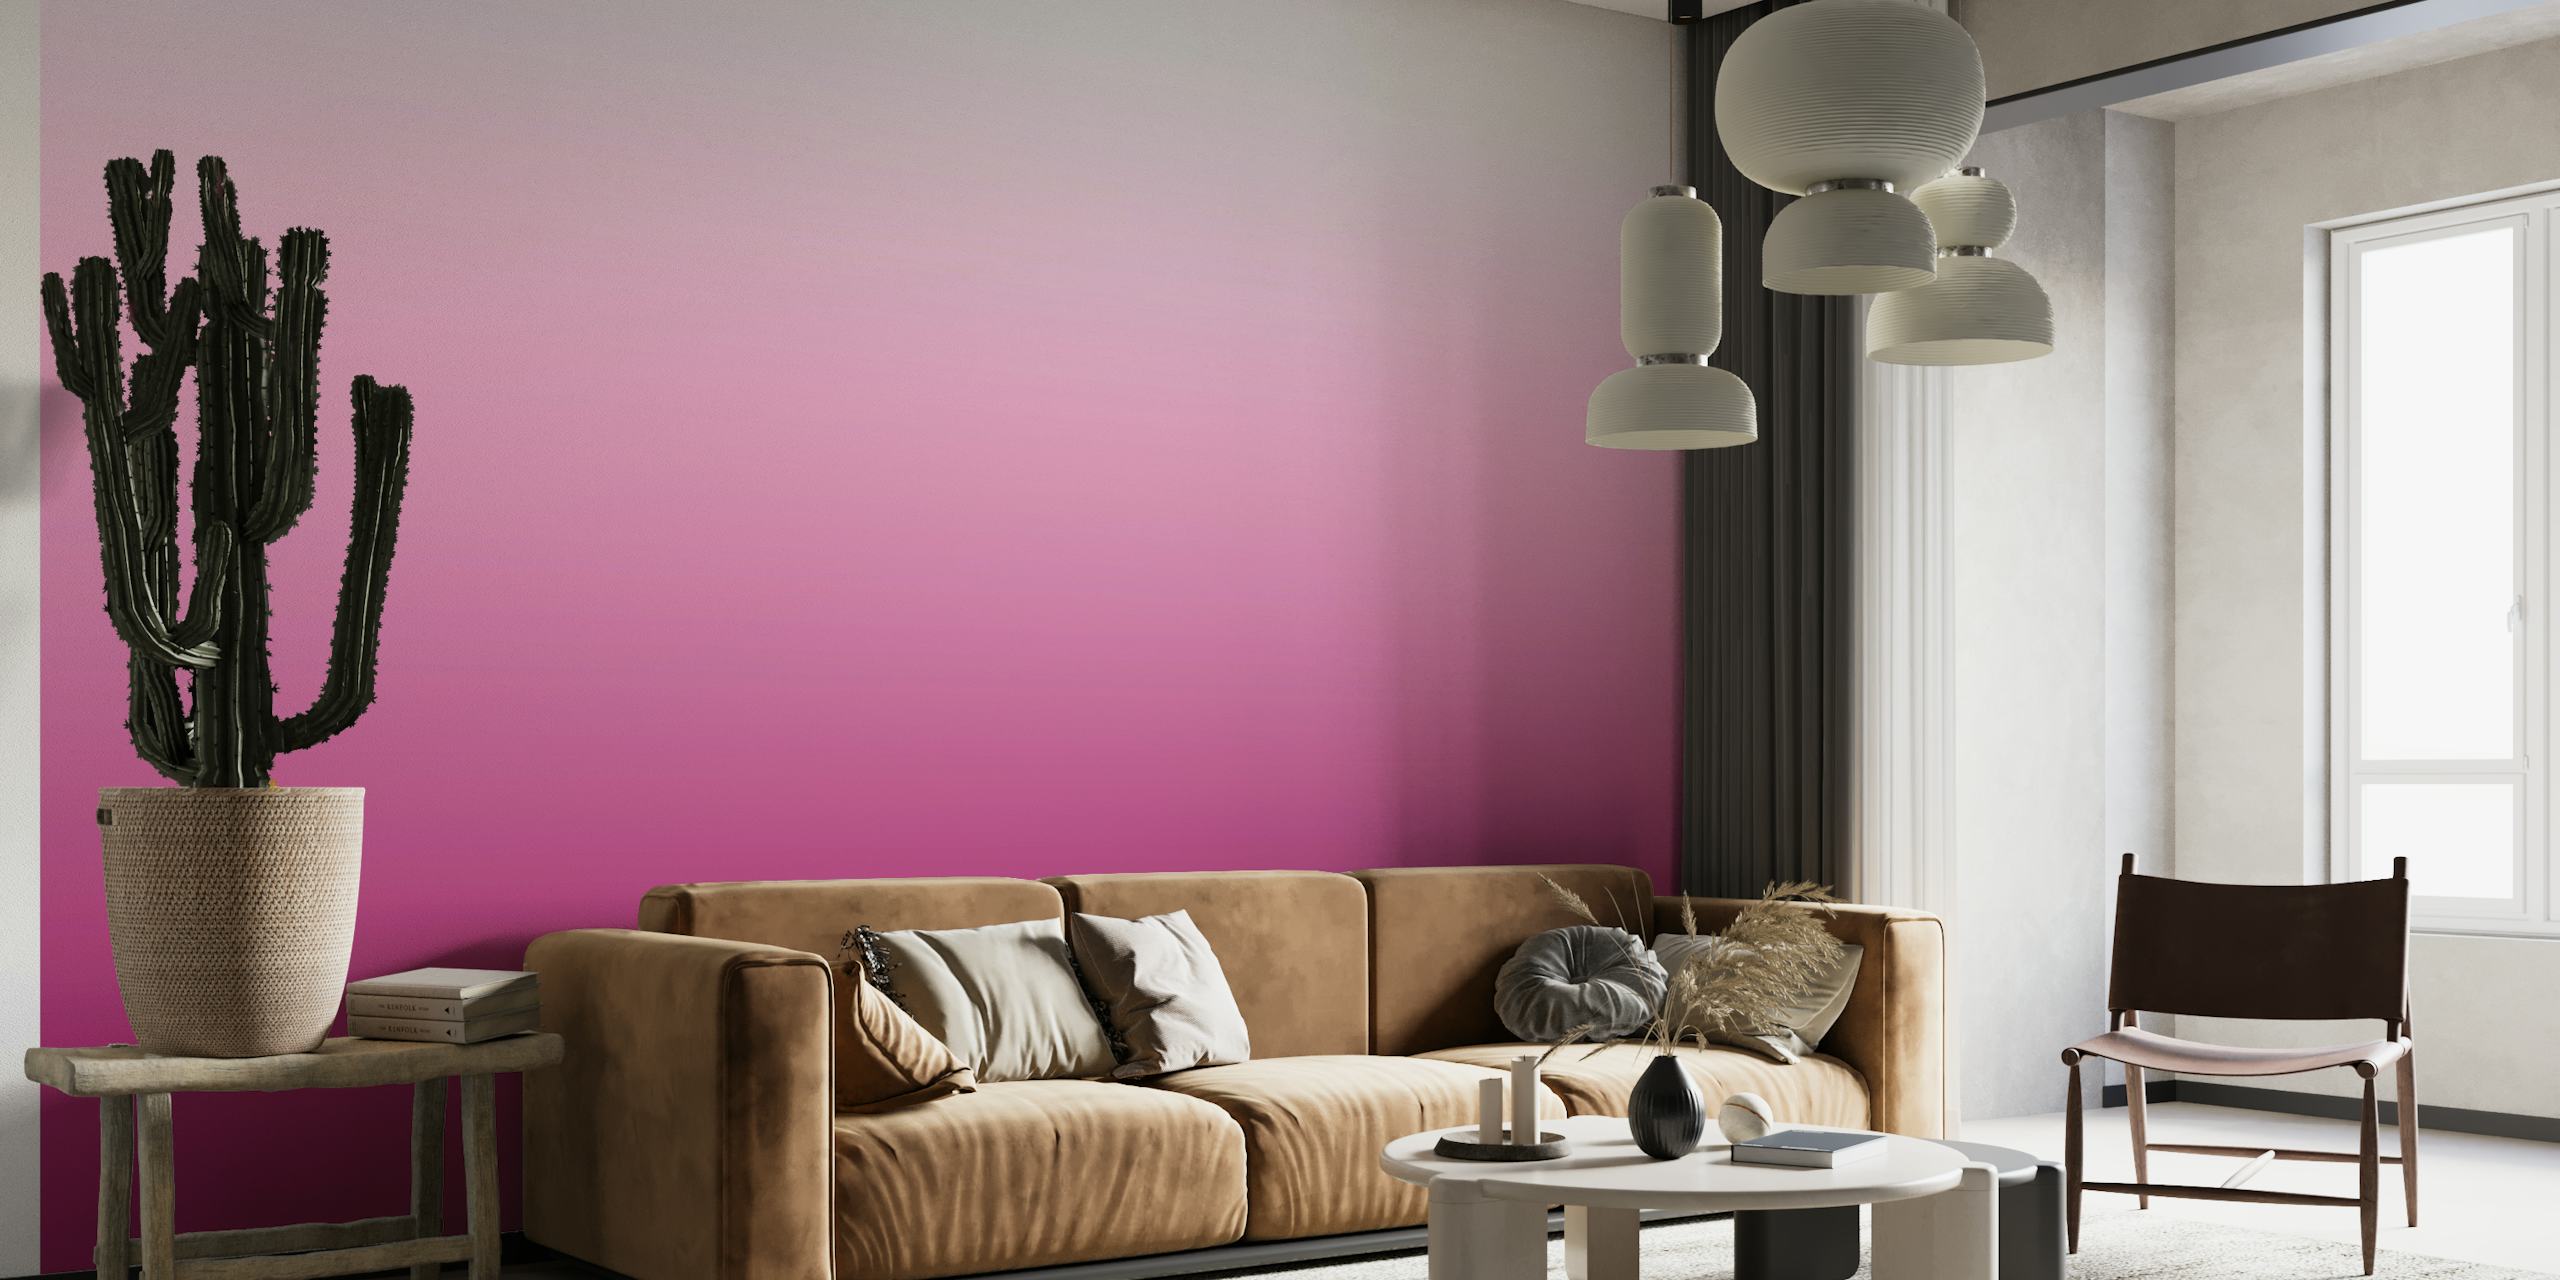 Elegant French Plum Gradient wall mural with smooth transition from deep purple to soft pink.